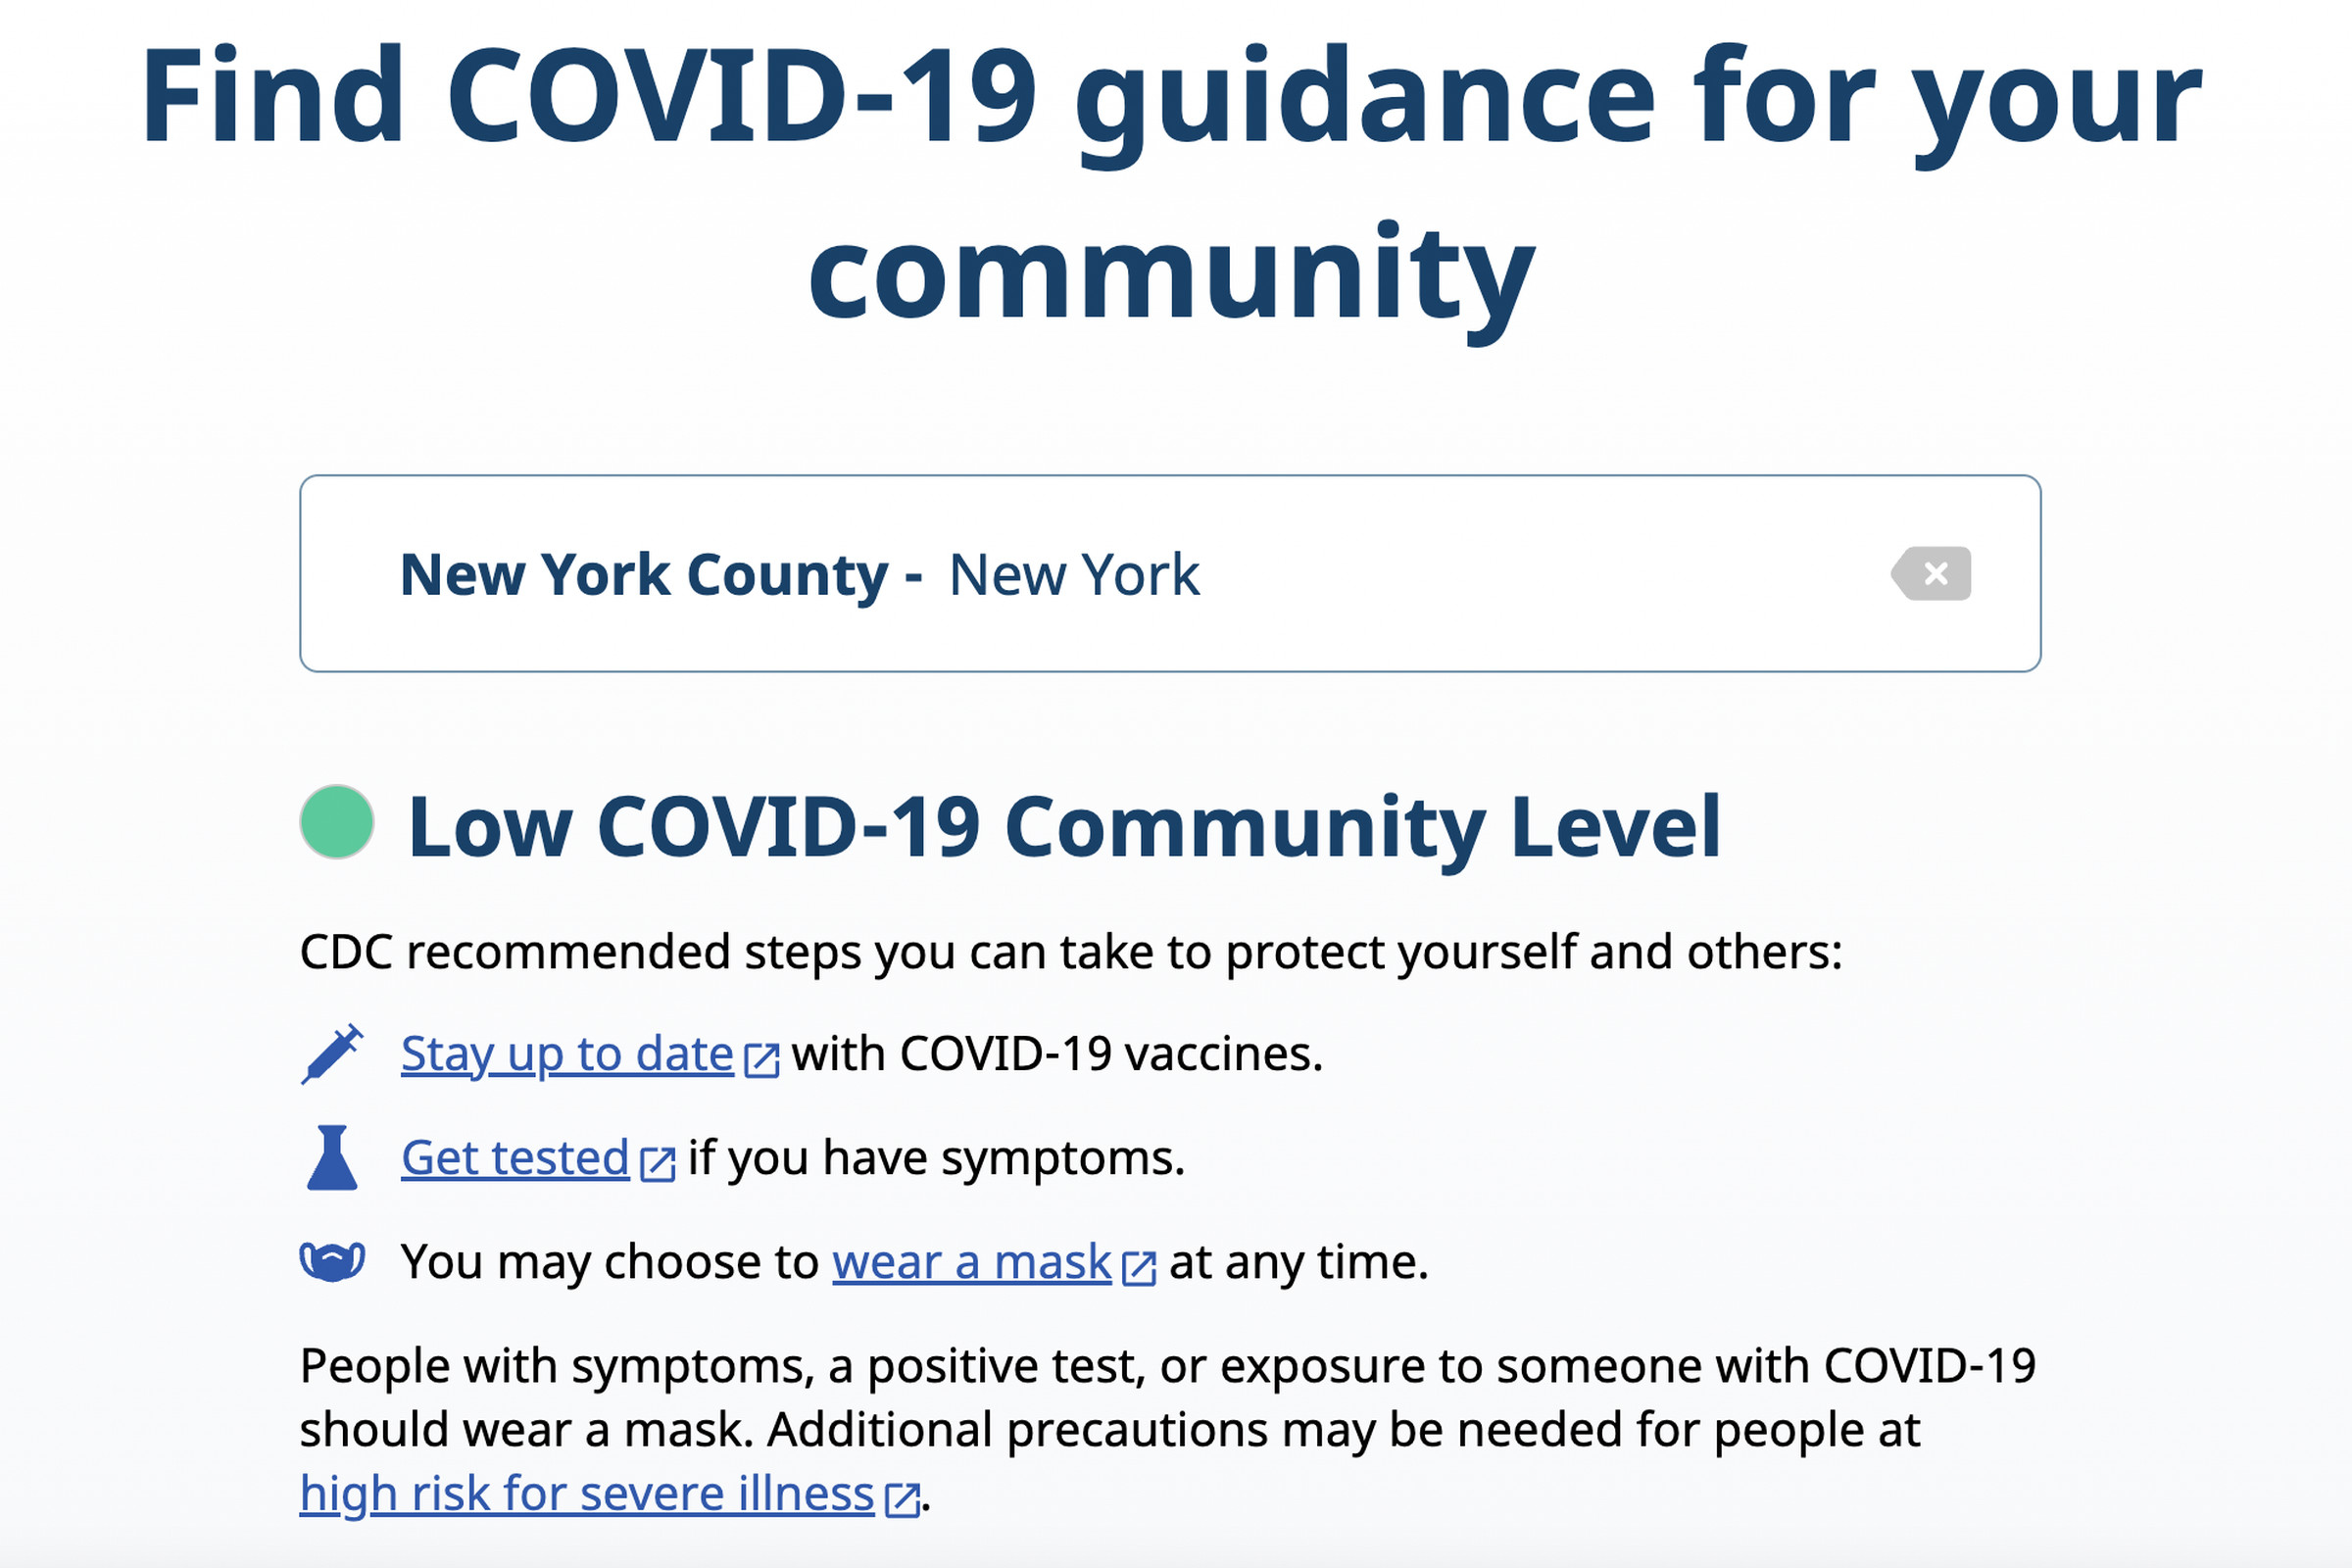 COVID.gov tells you the COVID-19 risk level in your community.